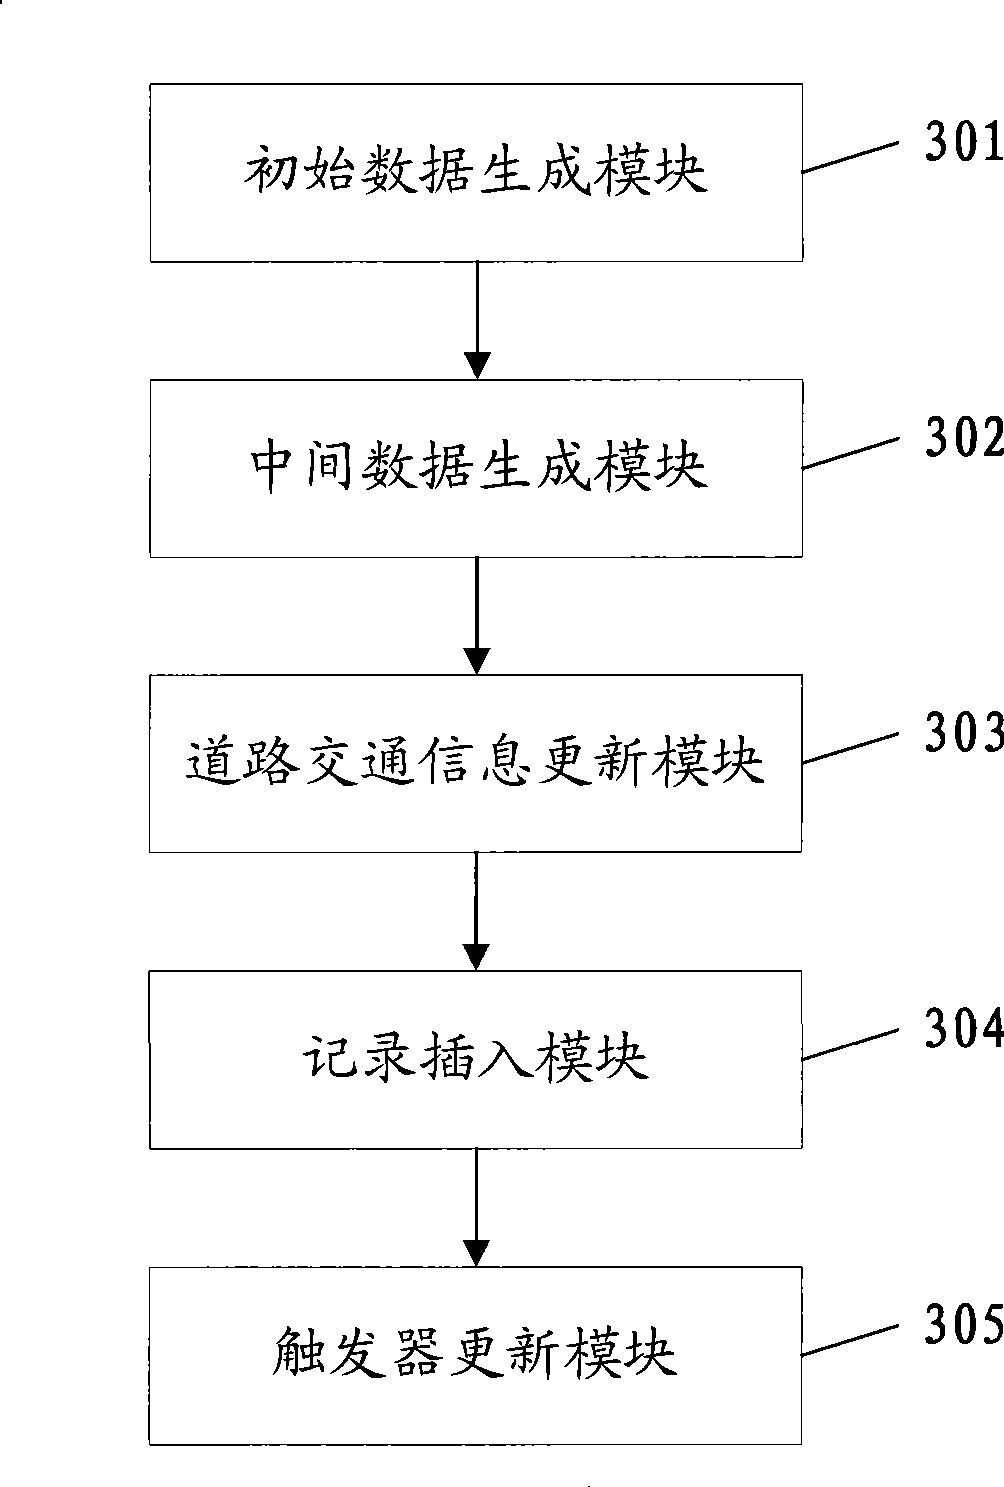 Road information management method and device